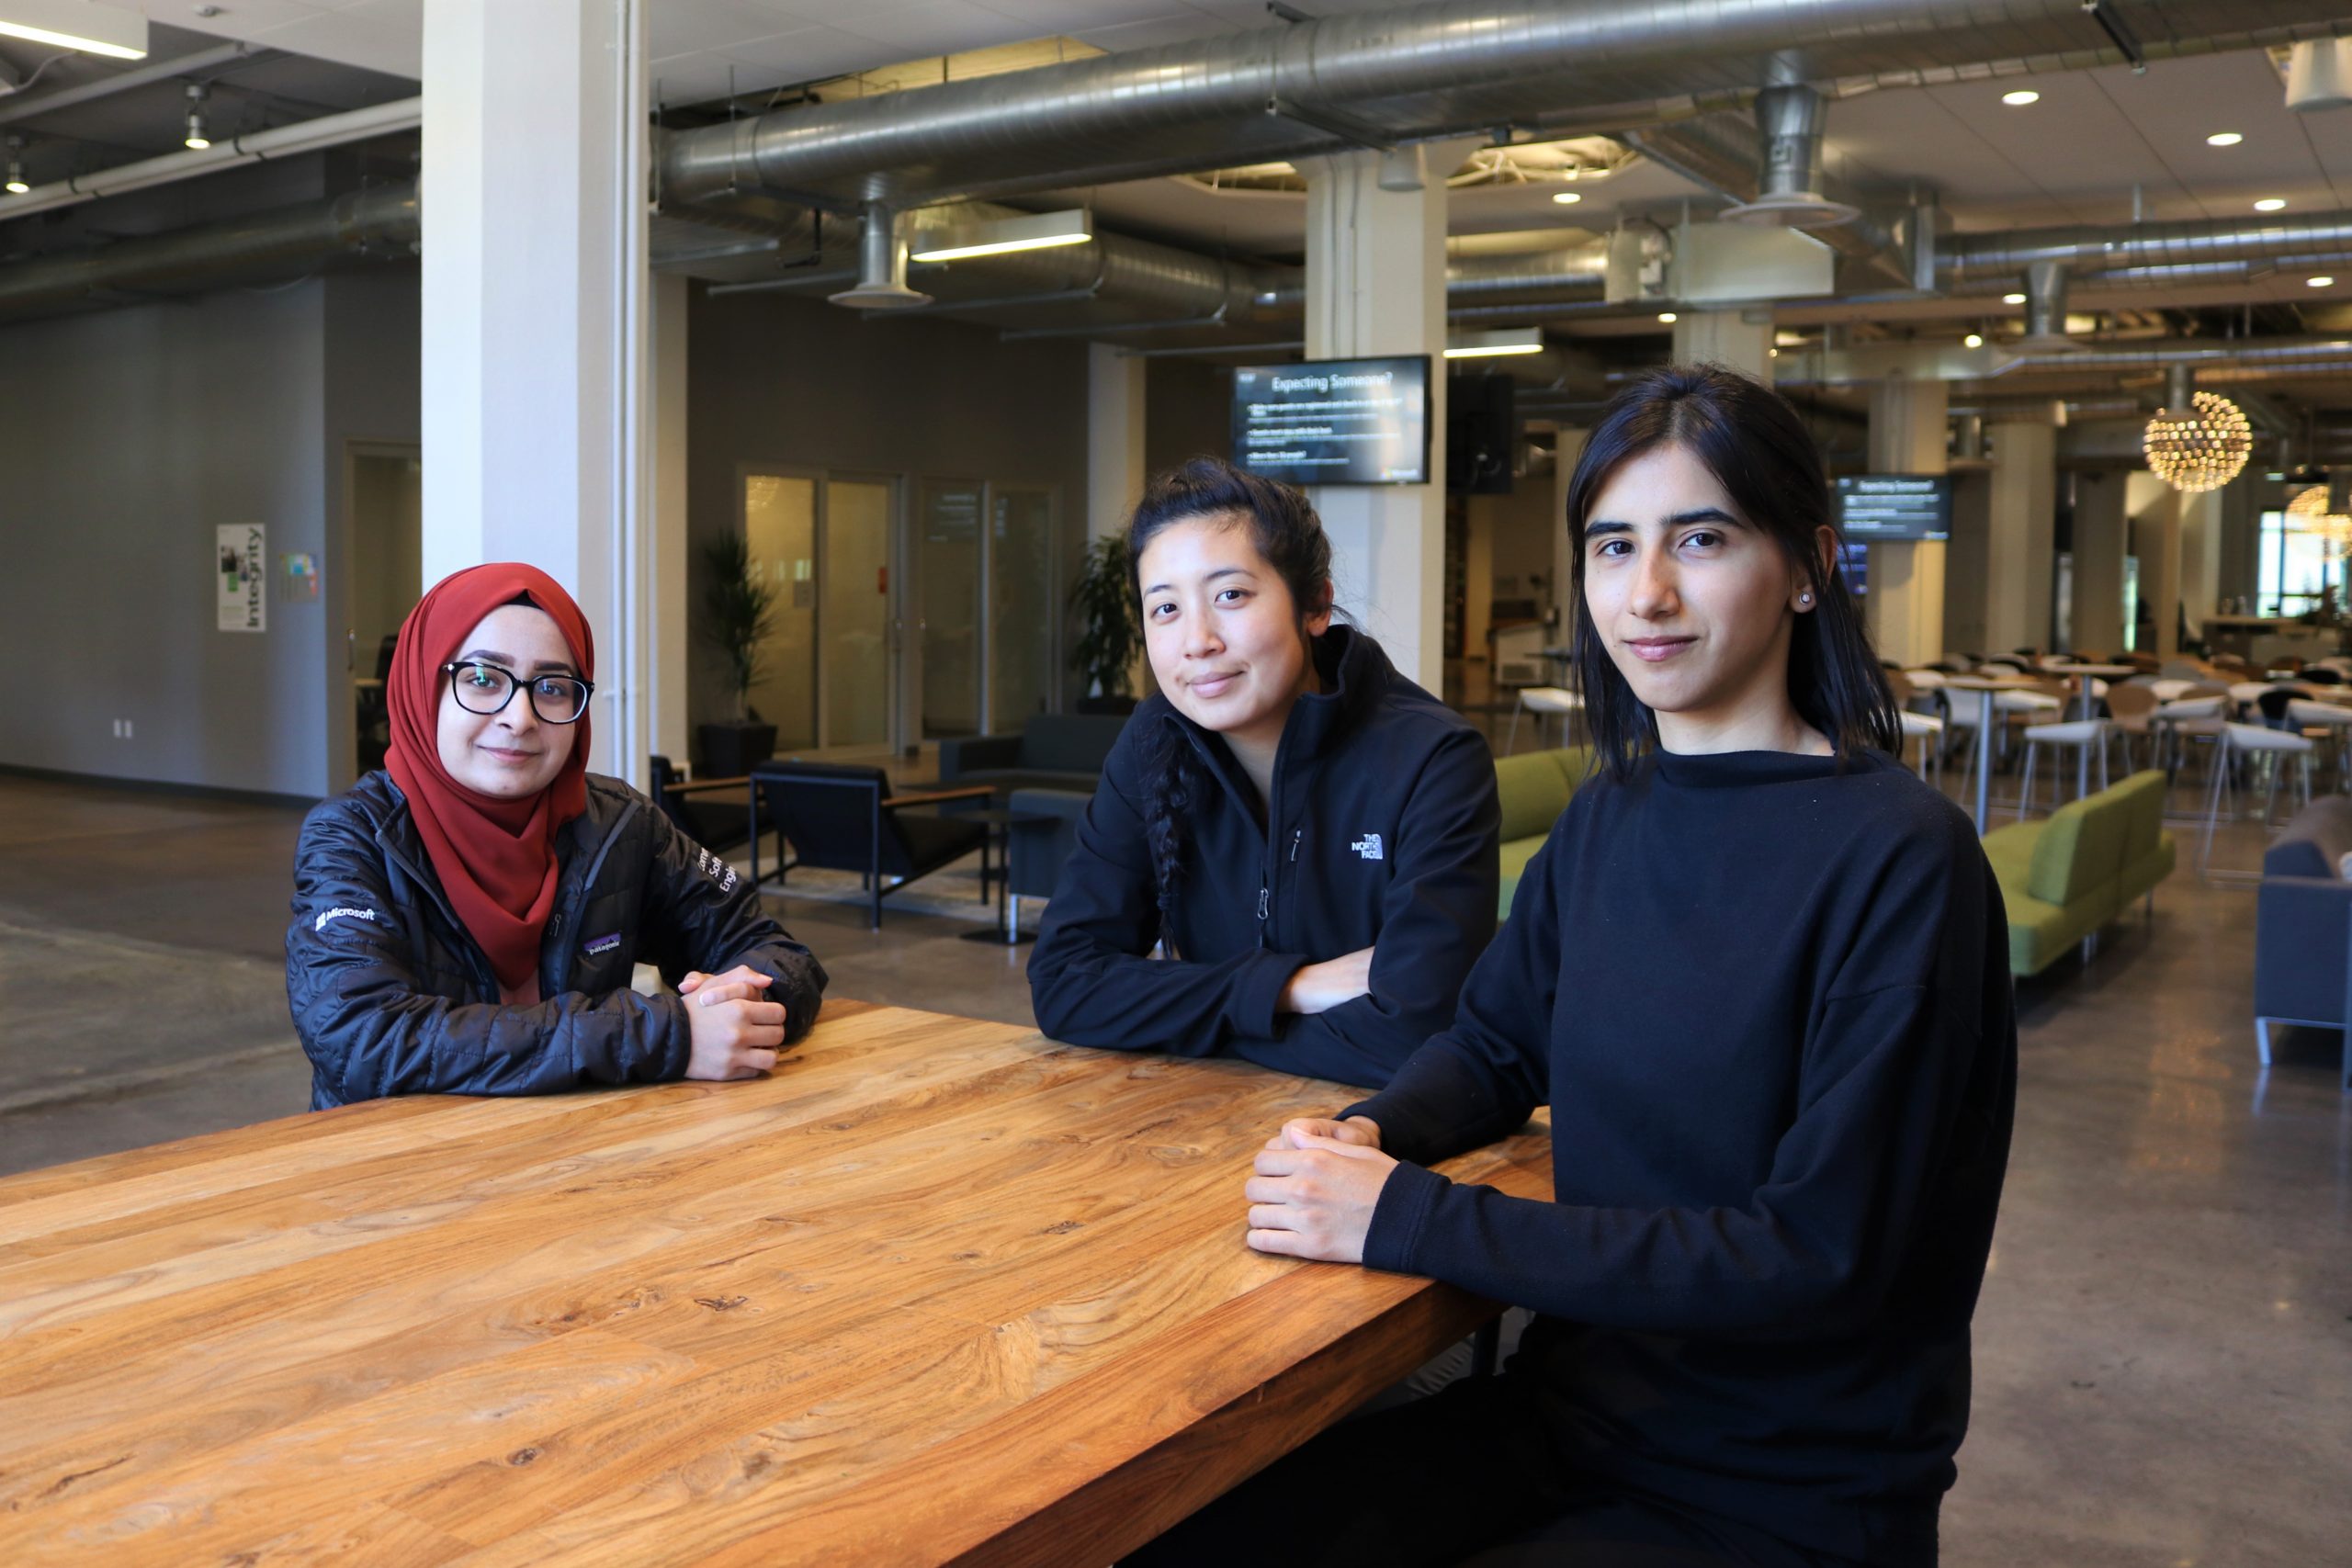 Edaena interviews fellow Microsoft Bay Area employees Samiya Akhtar and Yvonne Radsmikham, both software engineers on the Commercial Software Engineering